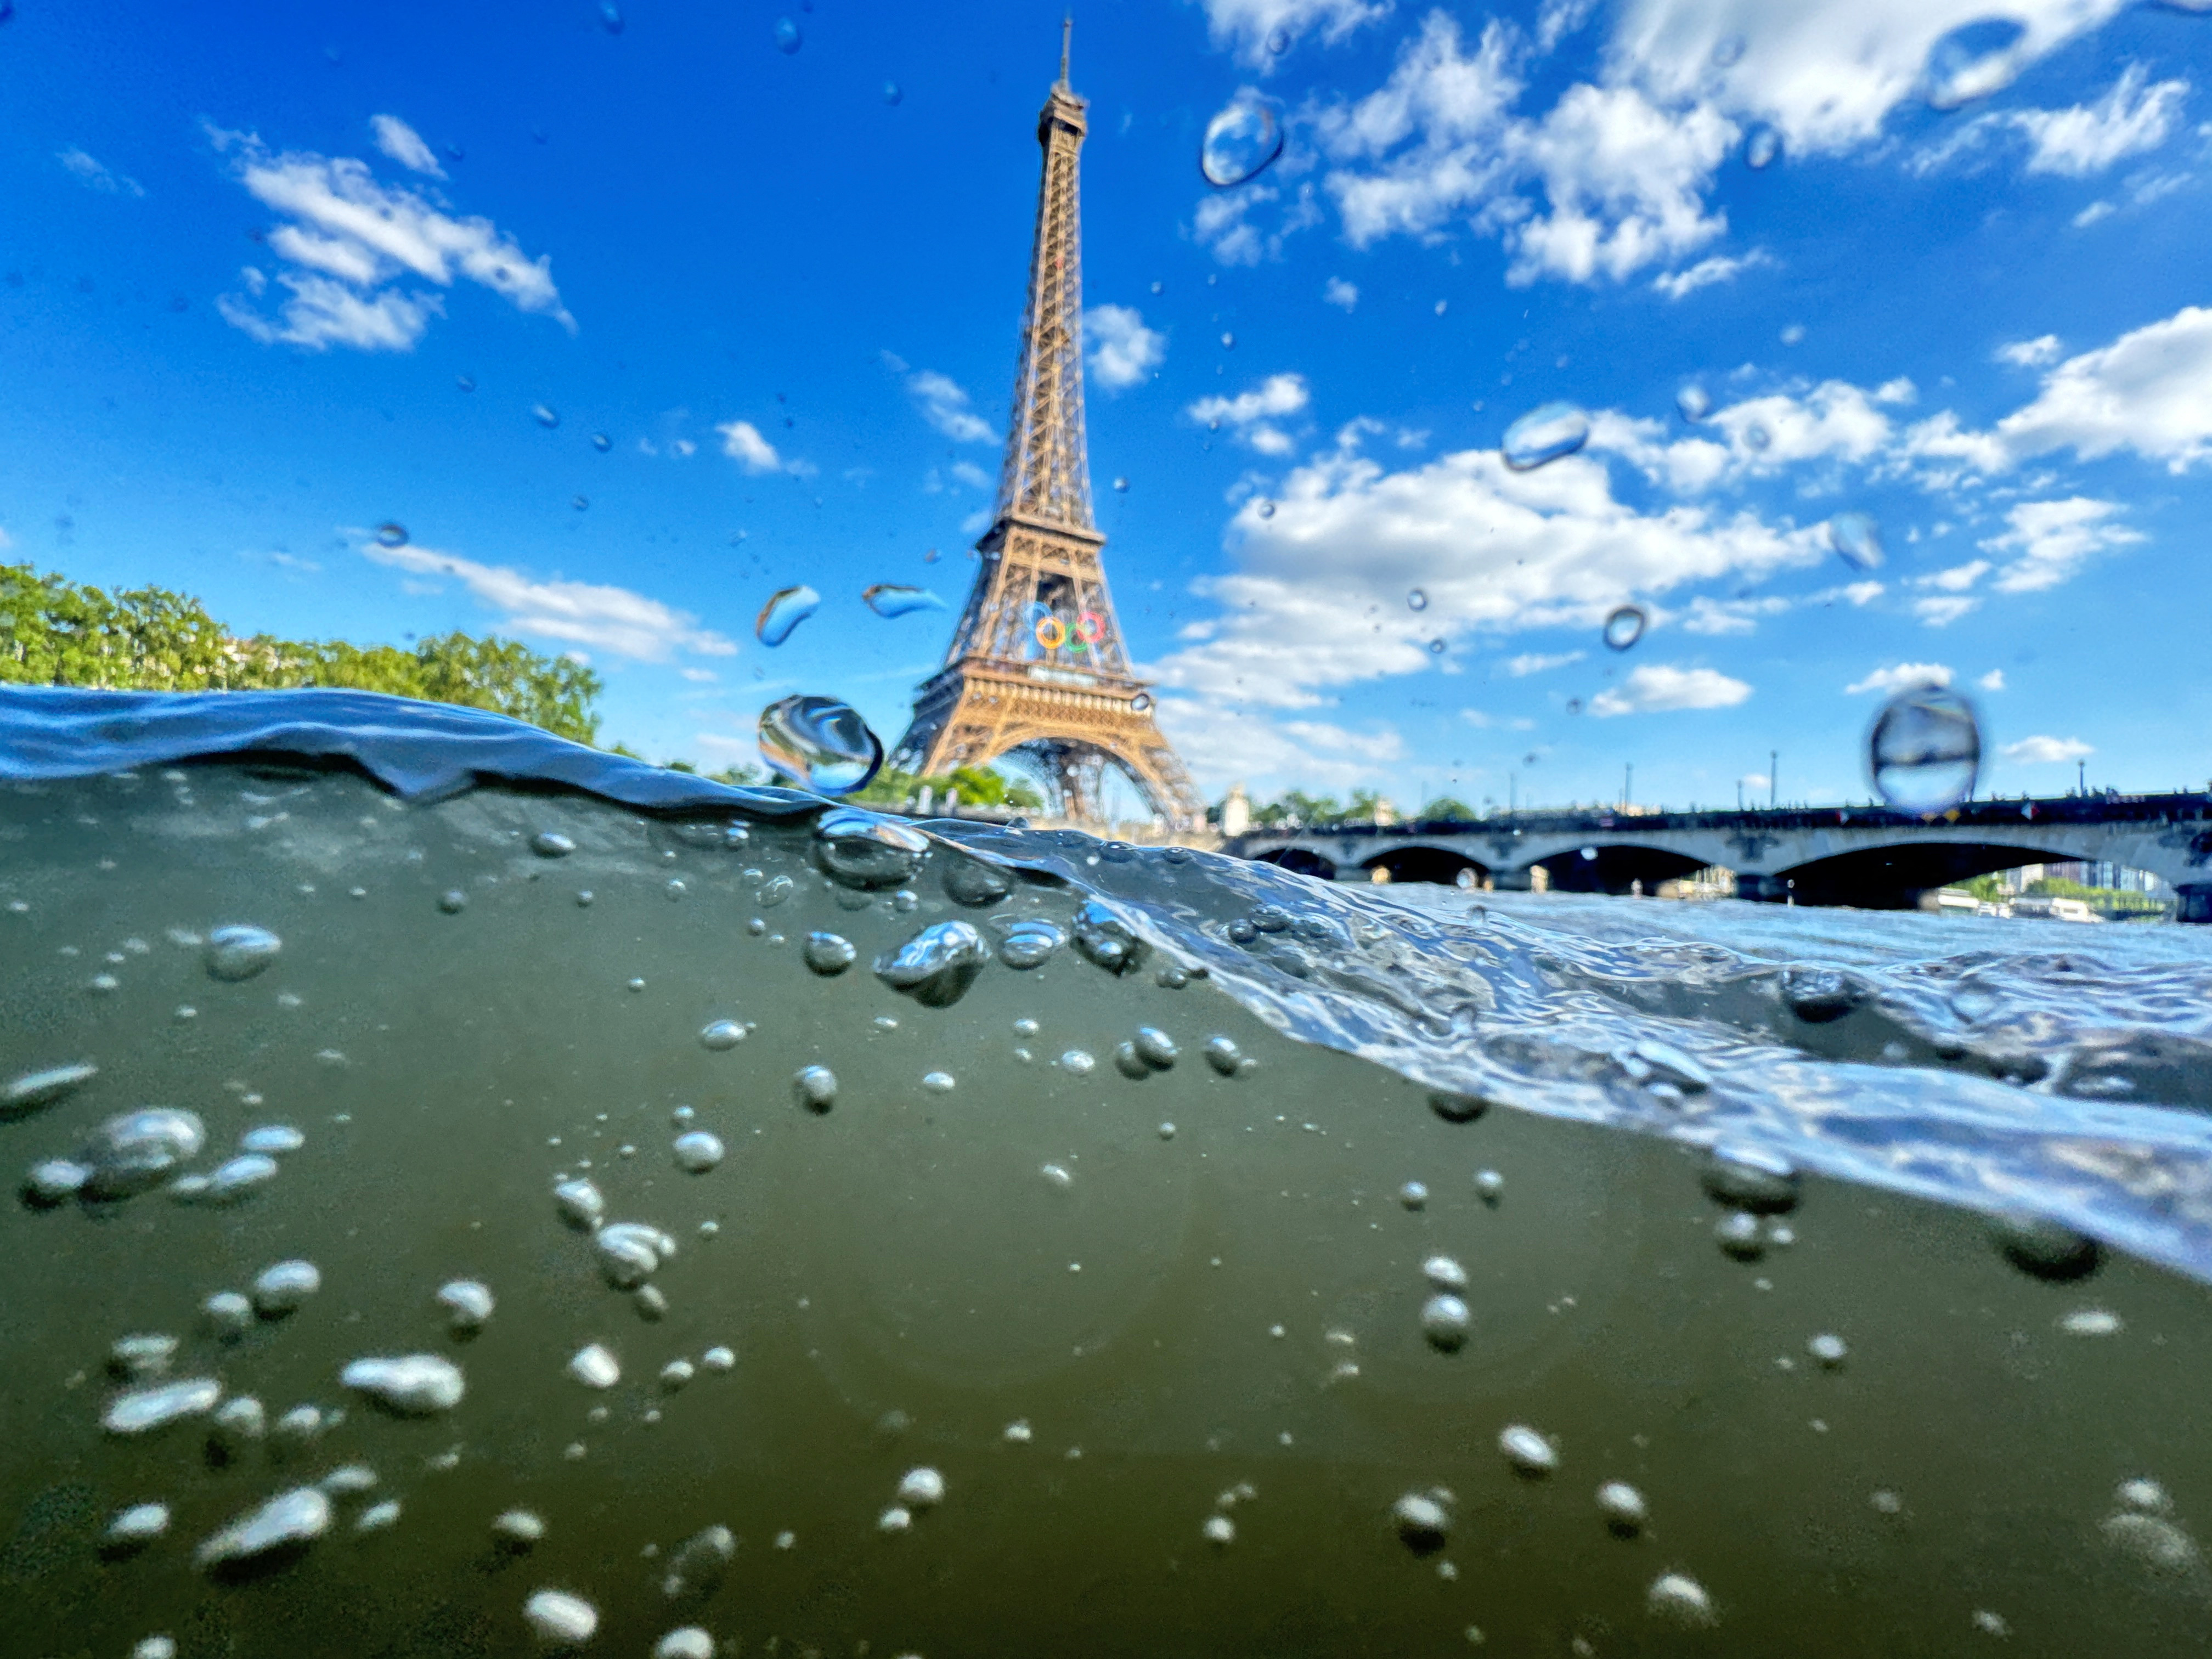 The Eiffel Tower is seen from the water of the Seine River as the Olympics opening ceremony rehearsal is postponed amid rainy weather.